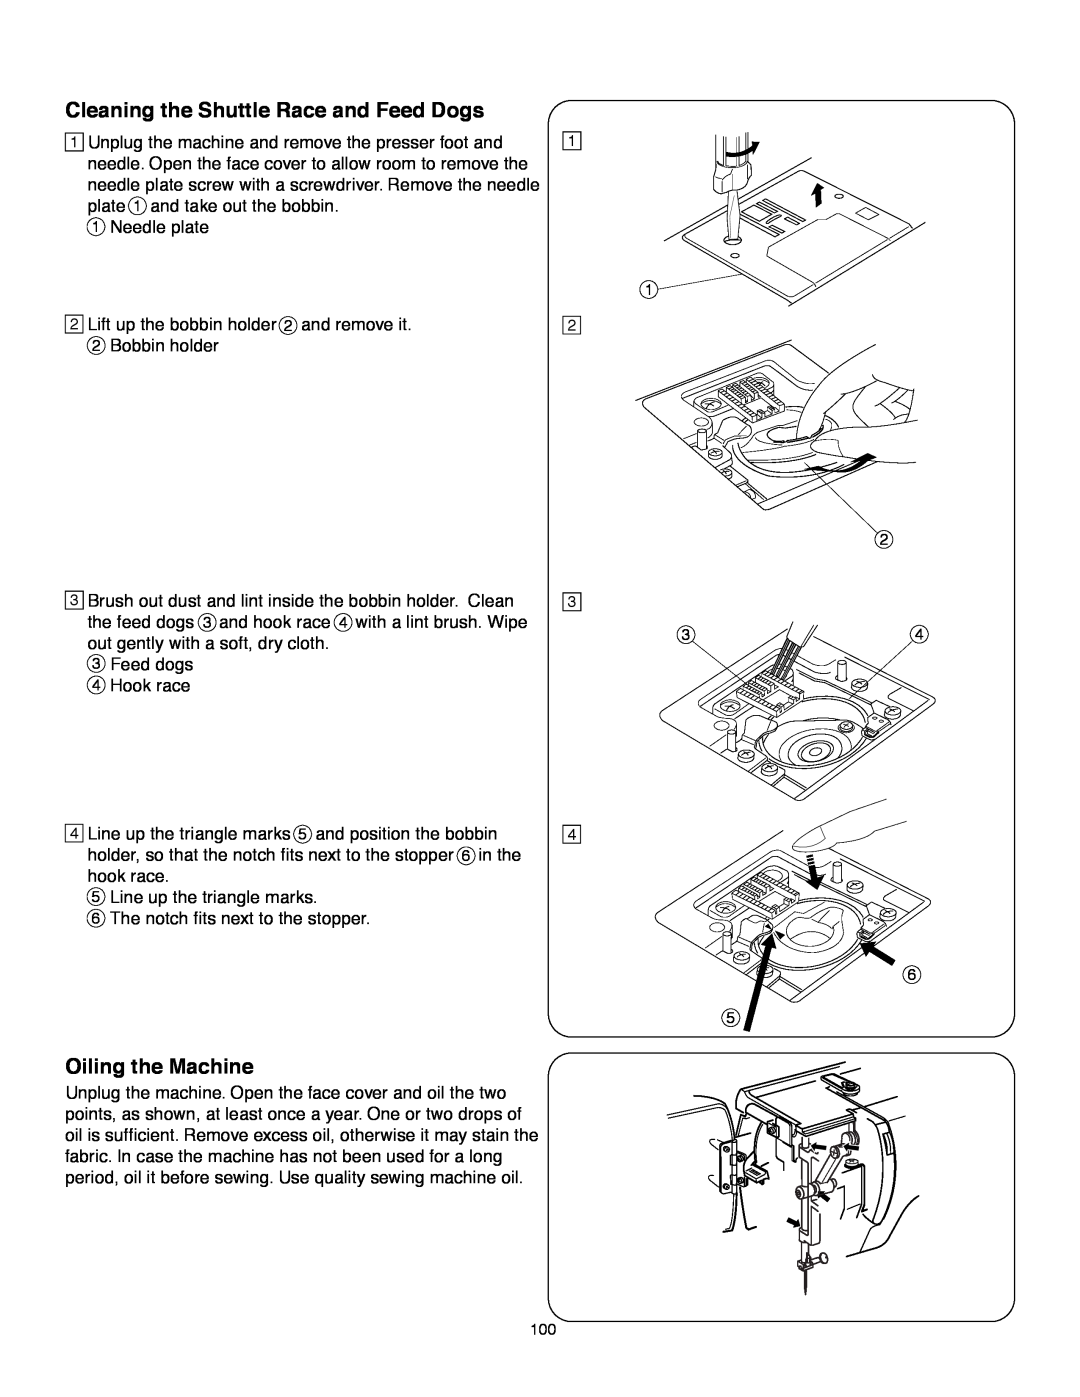 Janome MS-5027 instruction manual Cleaning the Shuttle Race and Feed Dogs, Oiling the Machine 